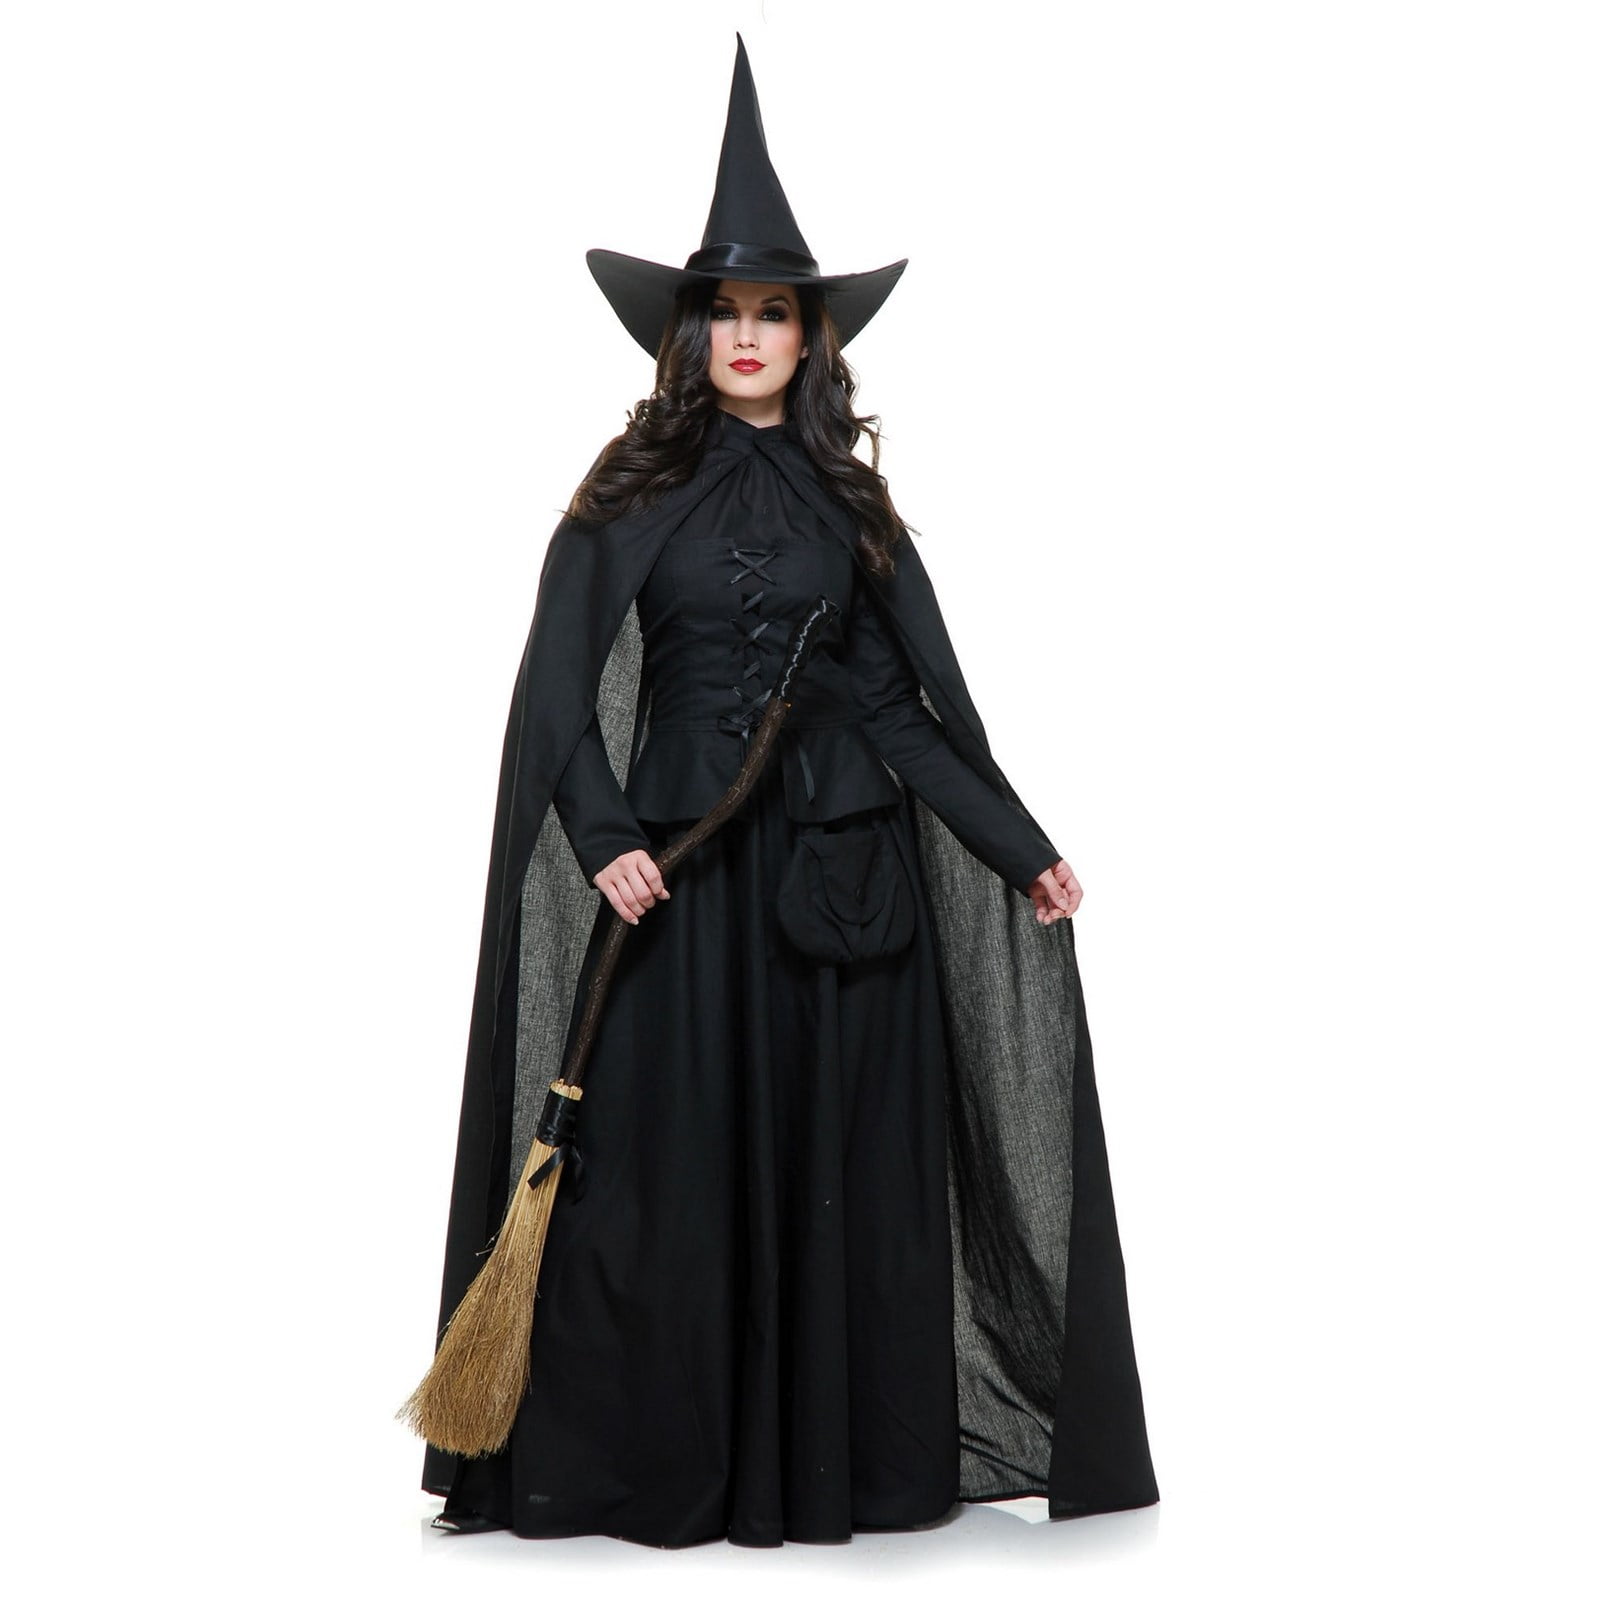 Satin Witch Hat Black Wicked Fancy Dress Up Halloween Adult Costume Accessory 